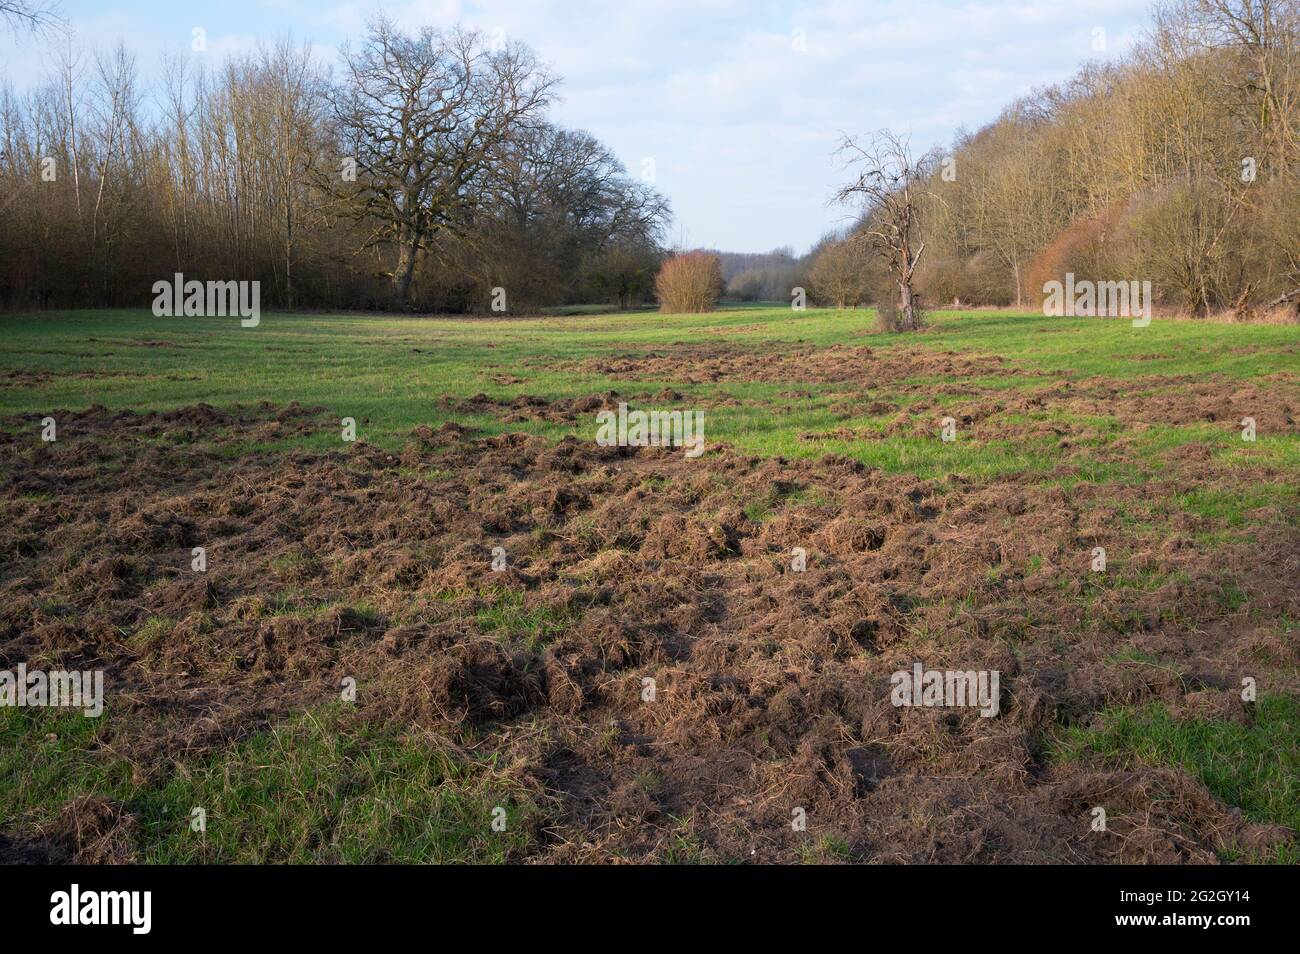 Game damage by wild boar in a meadow, March, Hesse, Germany Stock Photo